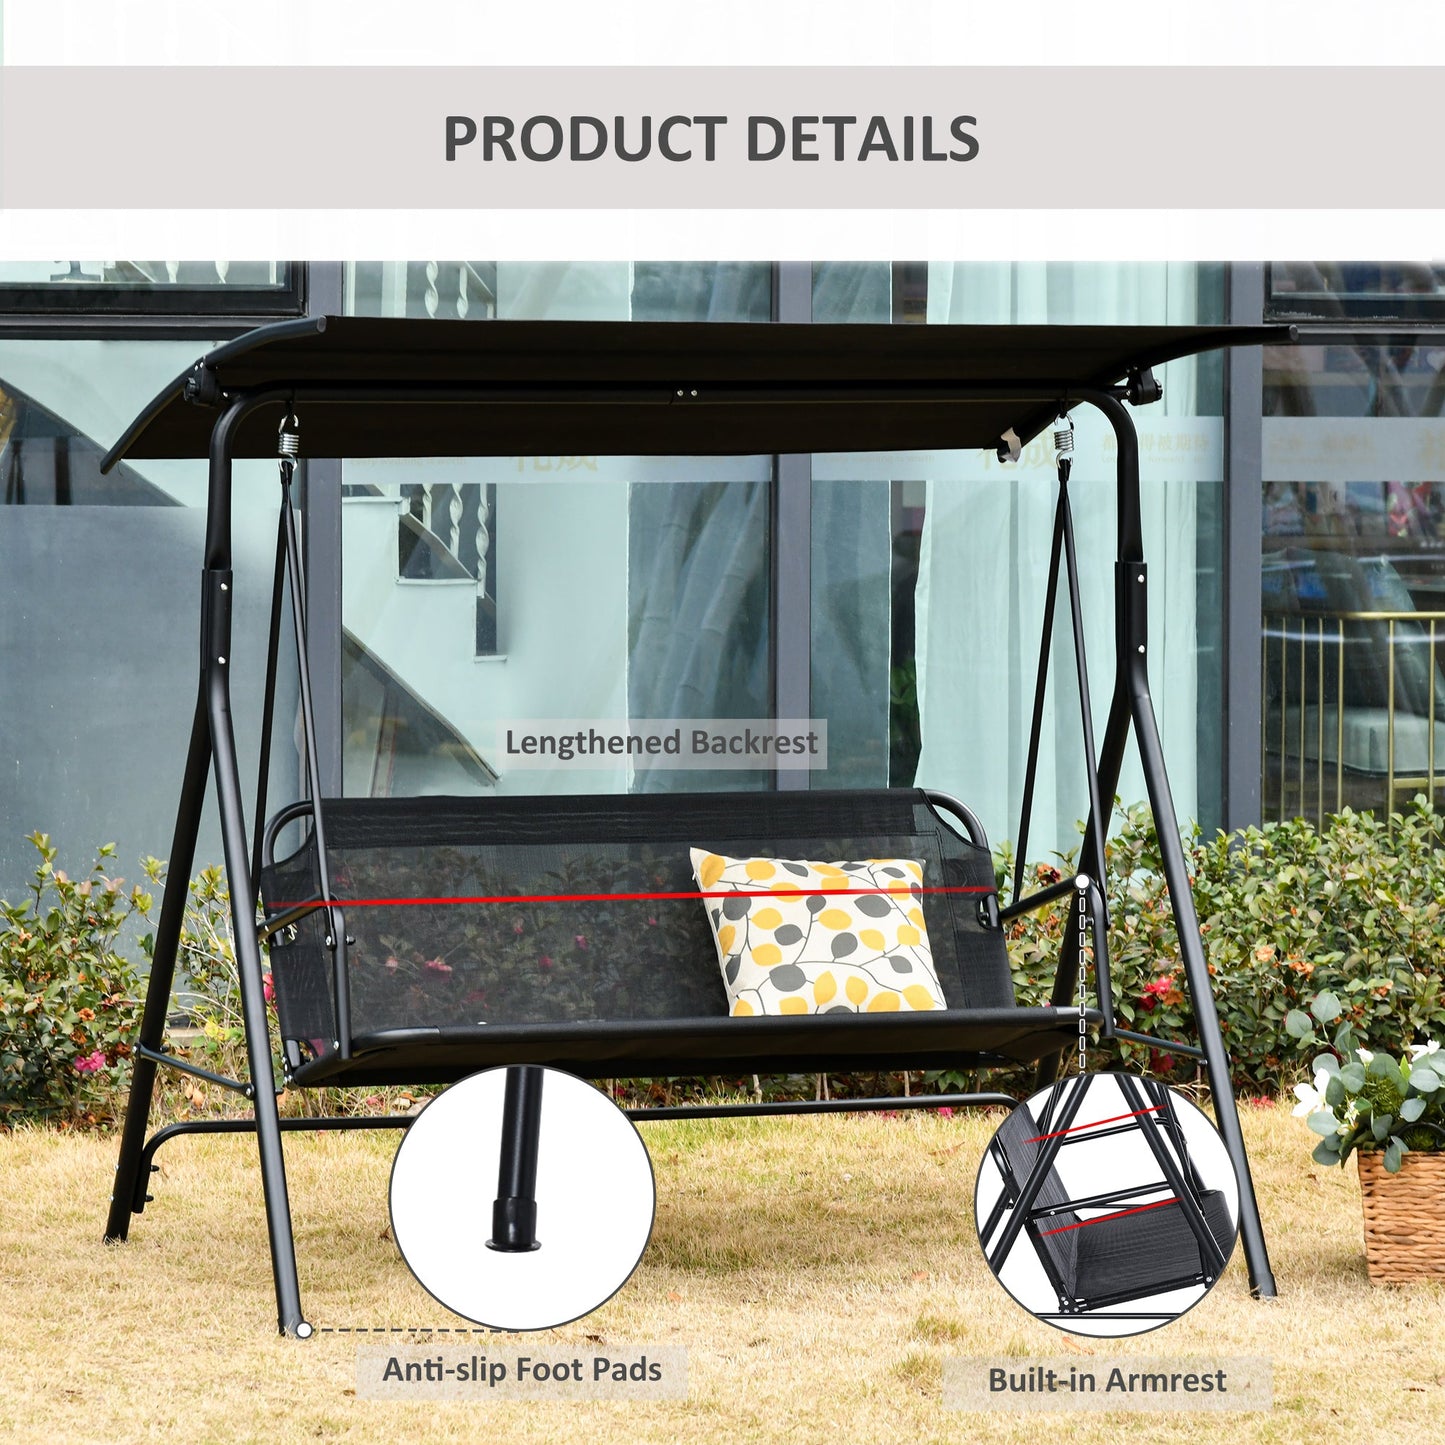 Outdoor and Garden-2-Seater Patio Swing Chair, Outdoor Adjustable Canopy Porch Swing with Armrests, Texeline Fabric and Steel Frame, Black - Outdoor Style Company